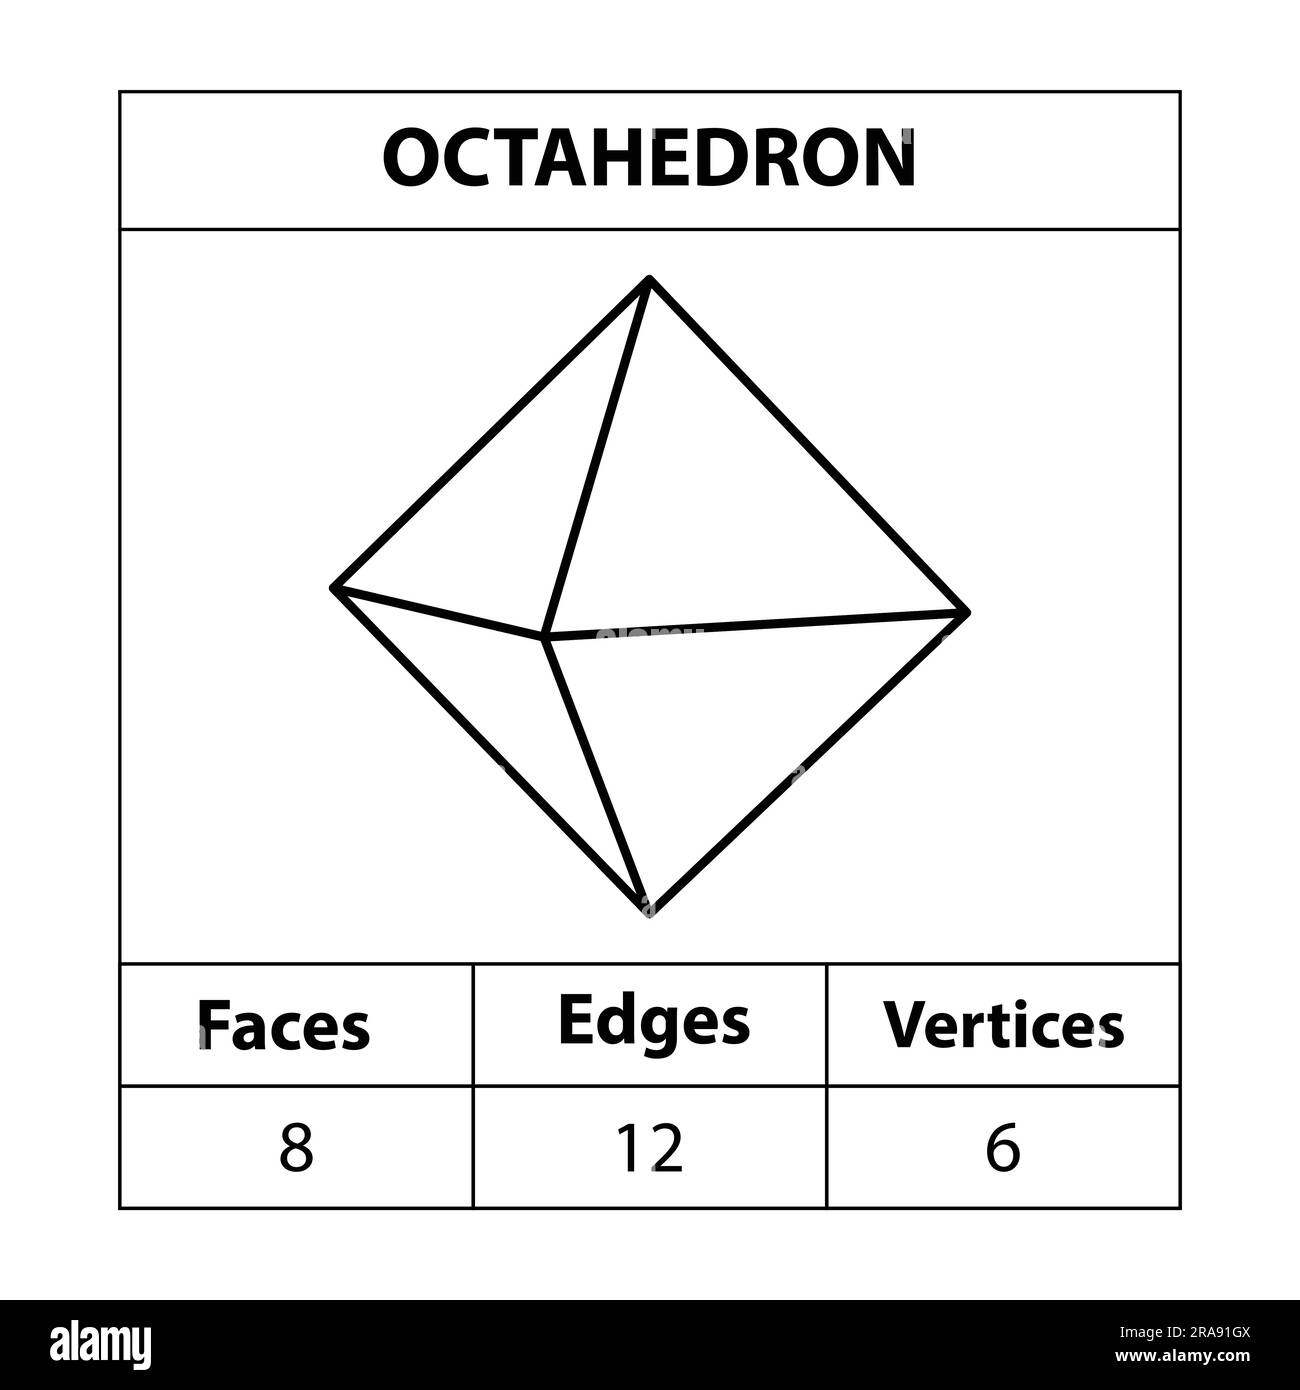 Octahedron Faces Edges Vertices Geometric Figures Outline Set Isolated